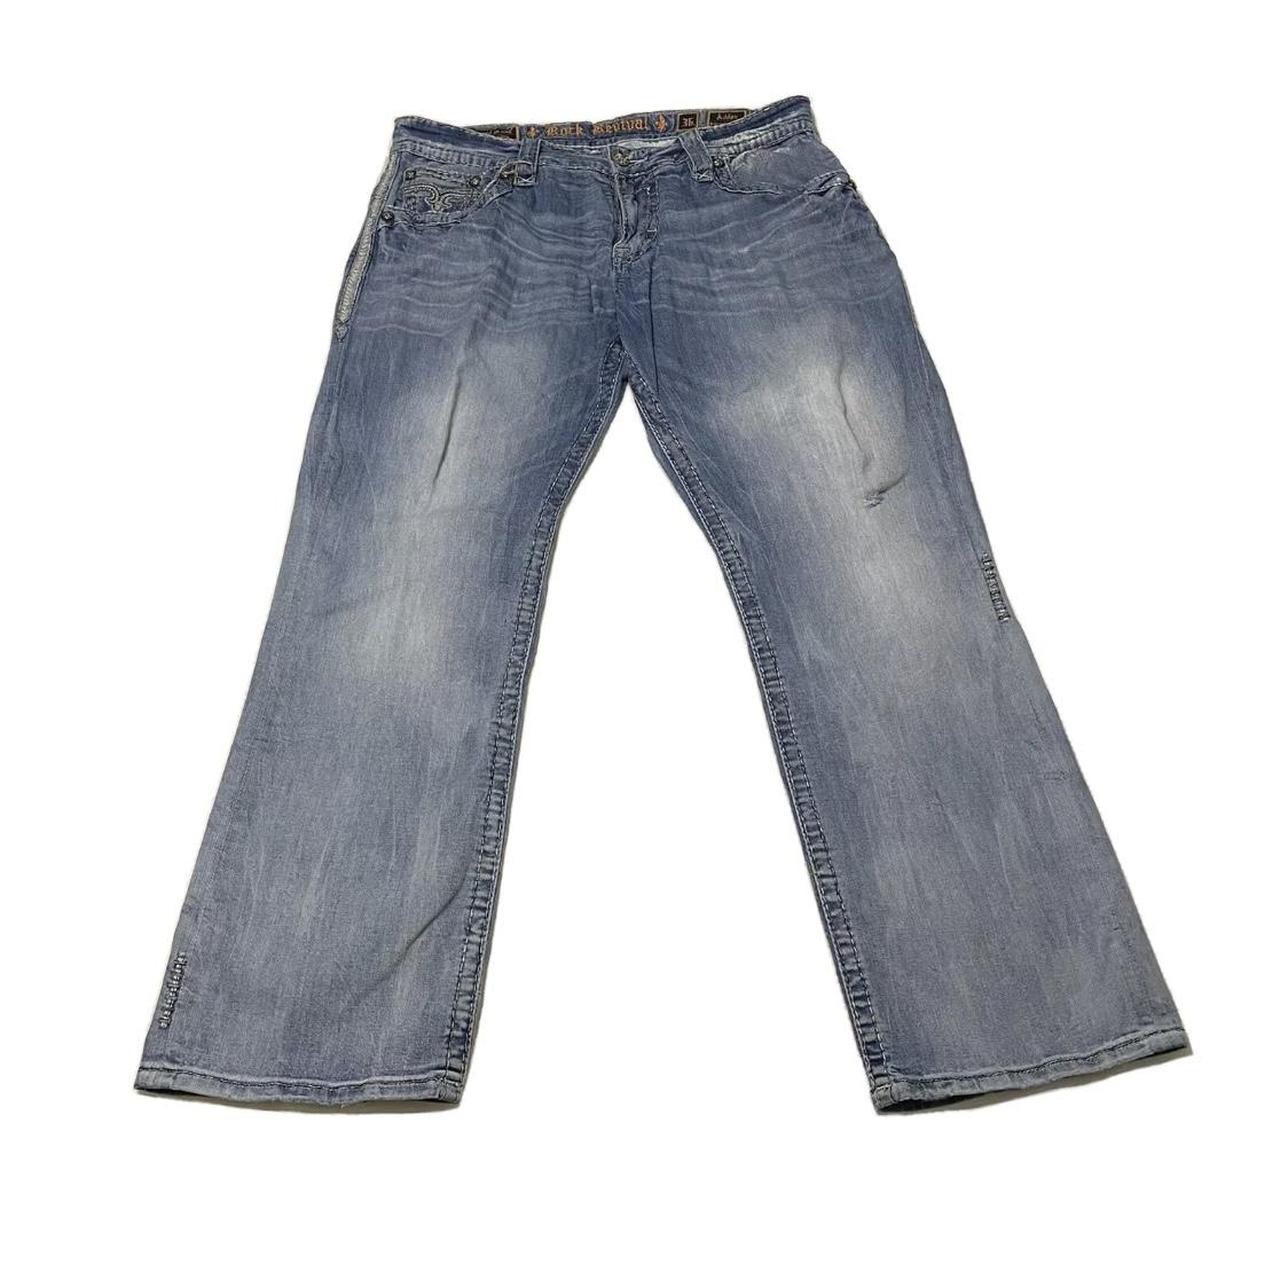 Product Image 2 - Rock Revival Denim Jeans 
Real